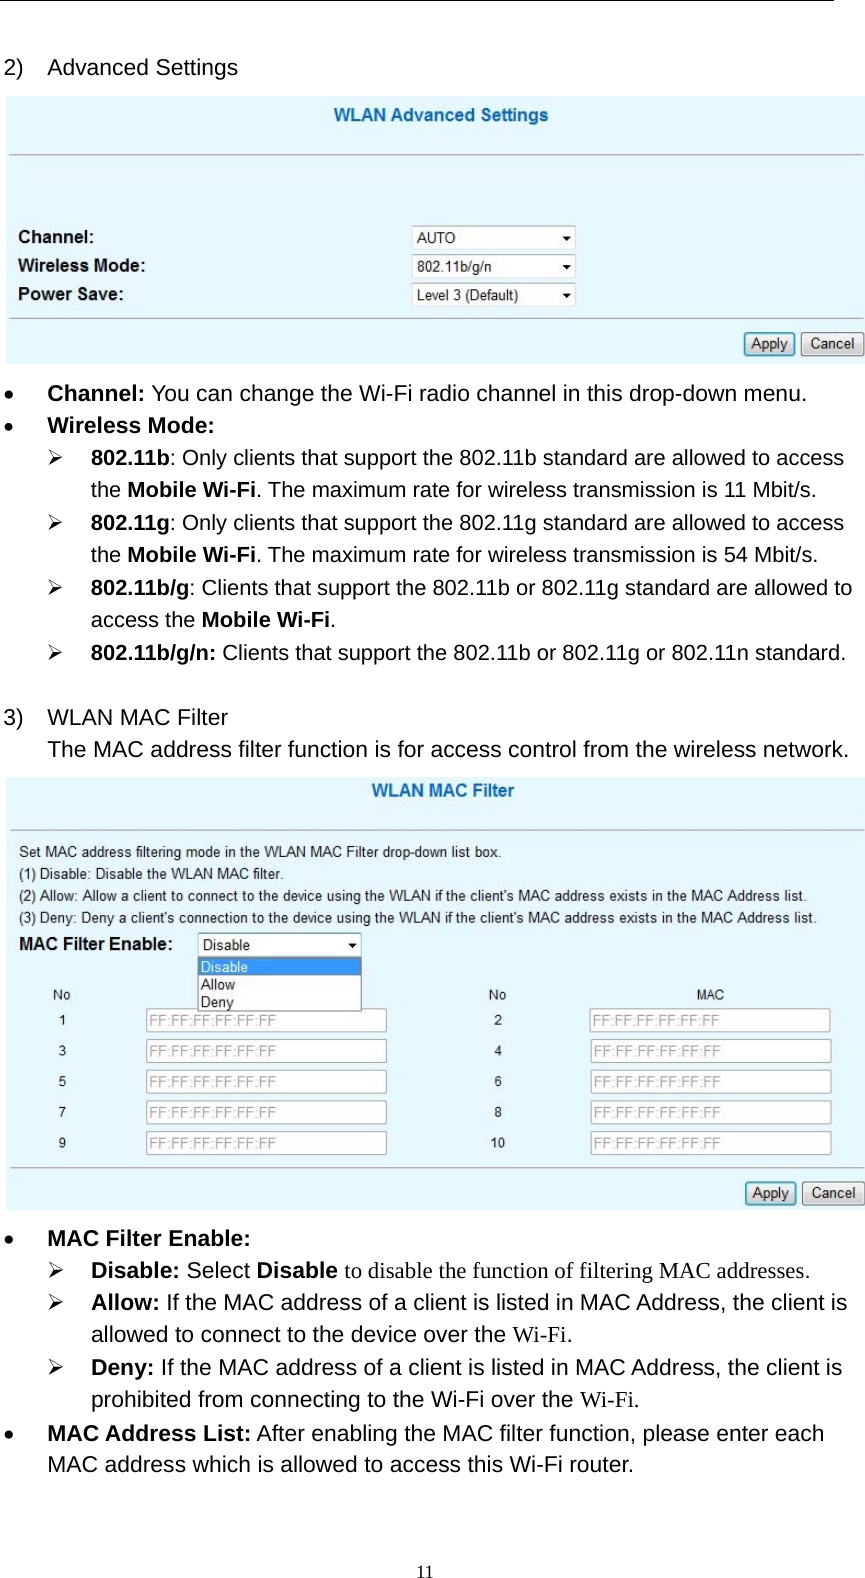   112) Advanced Settings   Channel: You can change the Wi-Fi radio channel in this drop-down menu.  Wireless Mode:   802.11b: Only clients that support the 802.11b standard are allowed to access the Mobile Wi-Fi. The maximum rate for wireless transmission is 11 Mbit/s.  802.11g: Only clients that support the 802.11g standard are allowed to access the Mobile Wi-Fi. The maximum rate for wireless transmission is 54 Mbit/s.  802.11b/g: Clients that support the 802.11b or 802.11g standard are allowed to access the Mobile Wi-Fi.  802.11b/g/n: Clients that support the 802.11b or 802.11g or 802.11n standard.  3)  WLAN MAC Filter The MAC address filter function is for access control from the wireless network.   MAC Filter Enable:   Disable: Select Disable to disable the function of filtering MAC addresses.  Allow: If the MAC address of a client is listed in MAC Address, the client is allowed to connect to the device over the Wi-Fi.  Deny: If the MAC address of a client is listed in MAC Address, the client is prohibited from connecting to the Wi-Fi over the Wi-Fi.  MAC Address List: After enabling the MAC filter function, please enter each MAC address which is allowed to access this Wi-Fi router. 